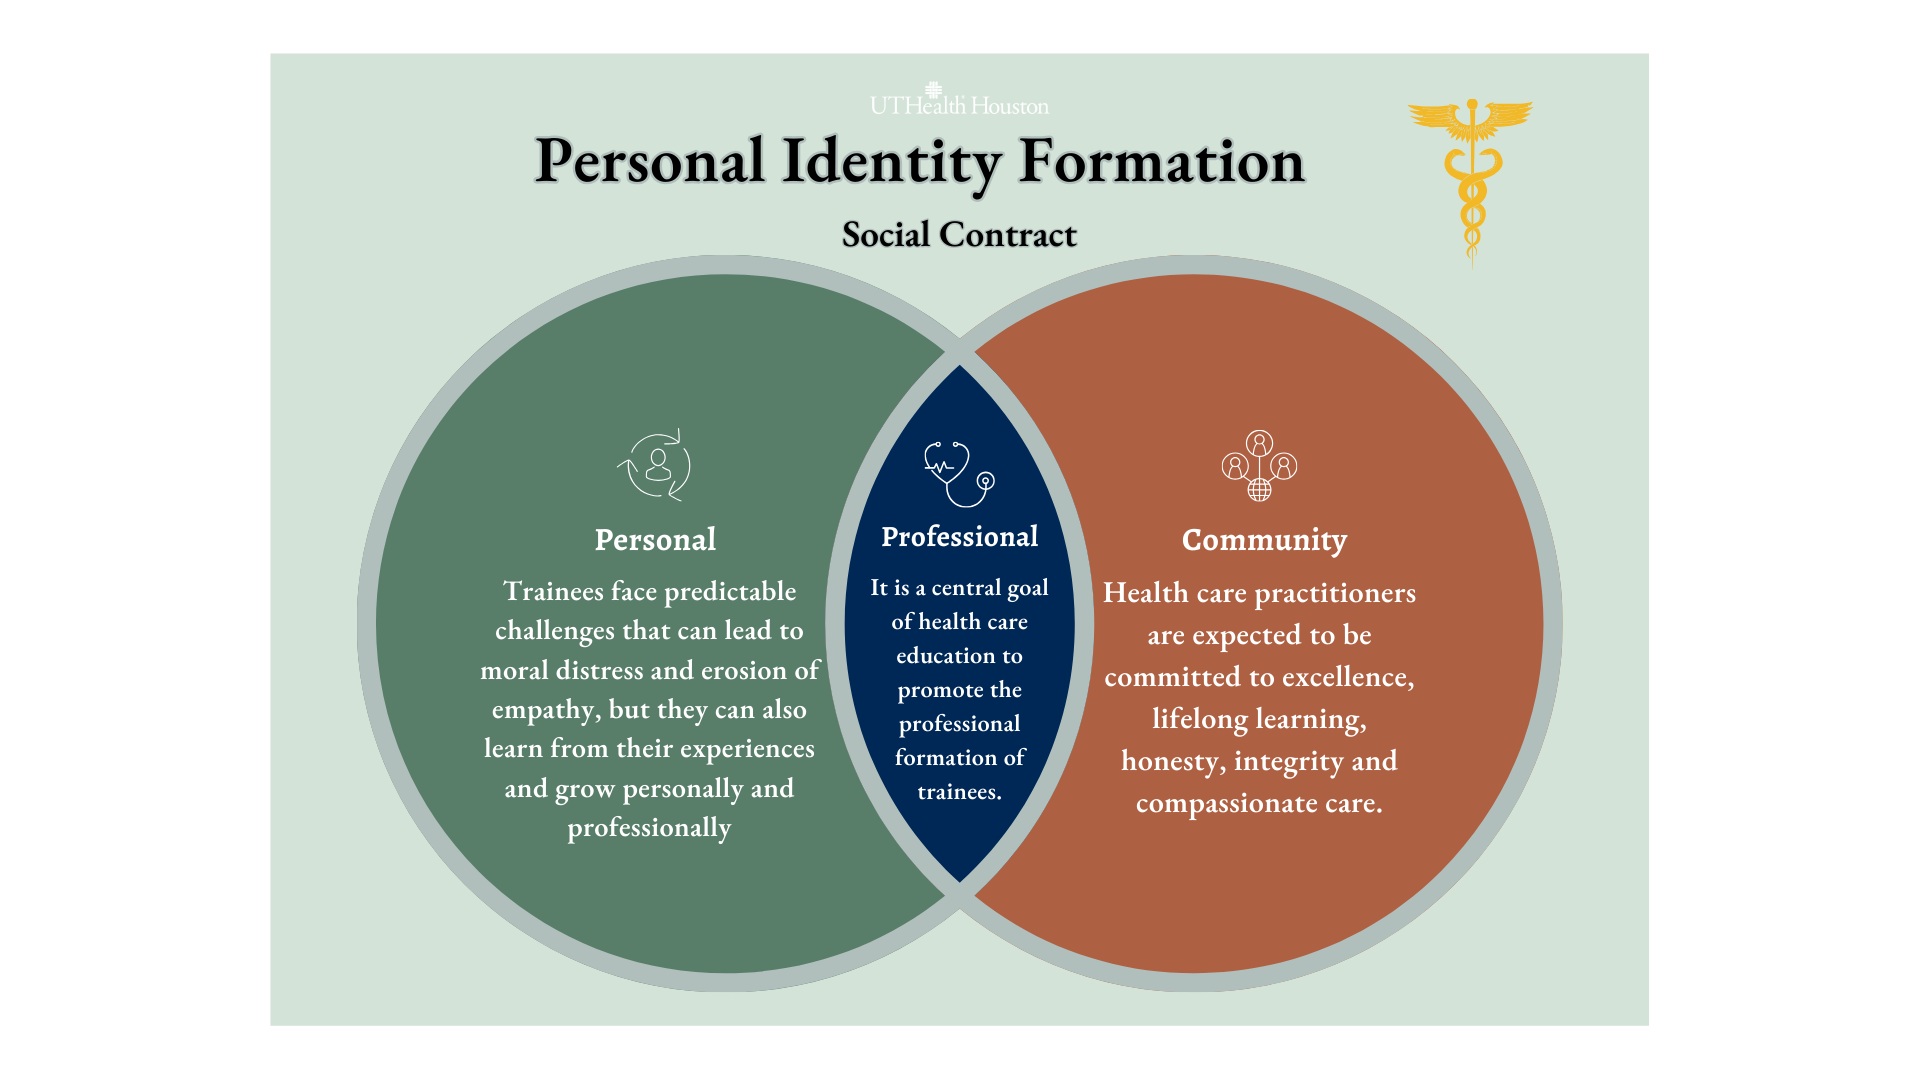 social contract of personal identity formation as a Venn diagram